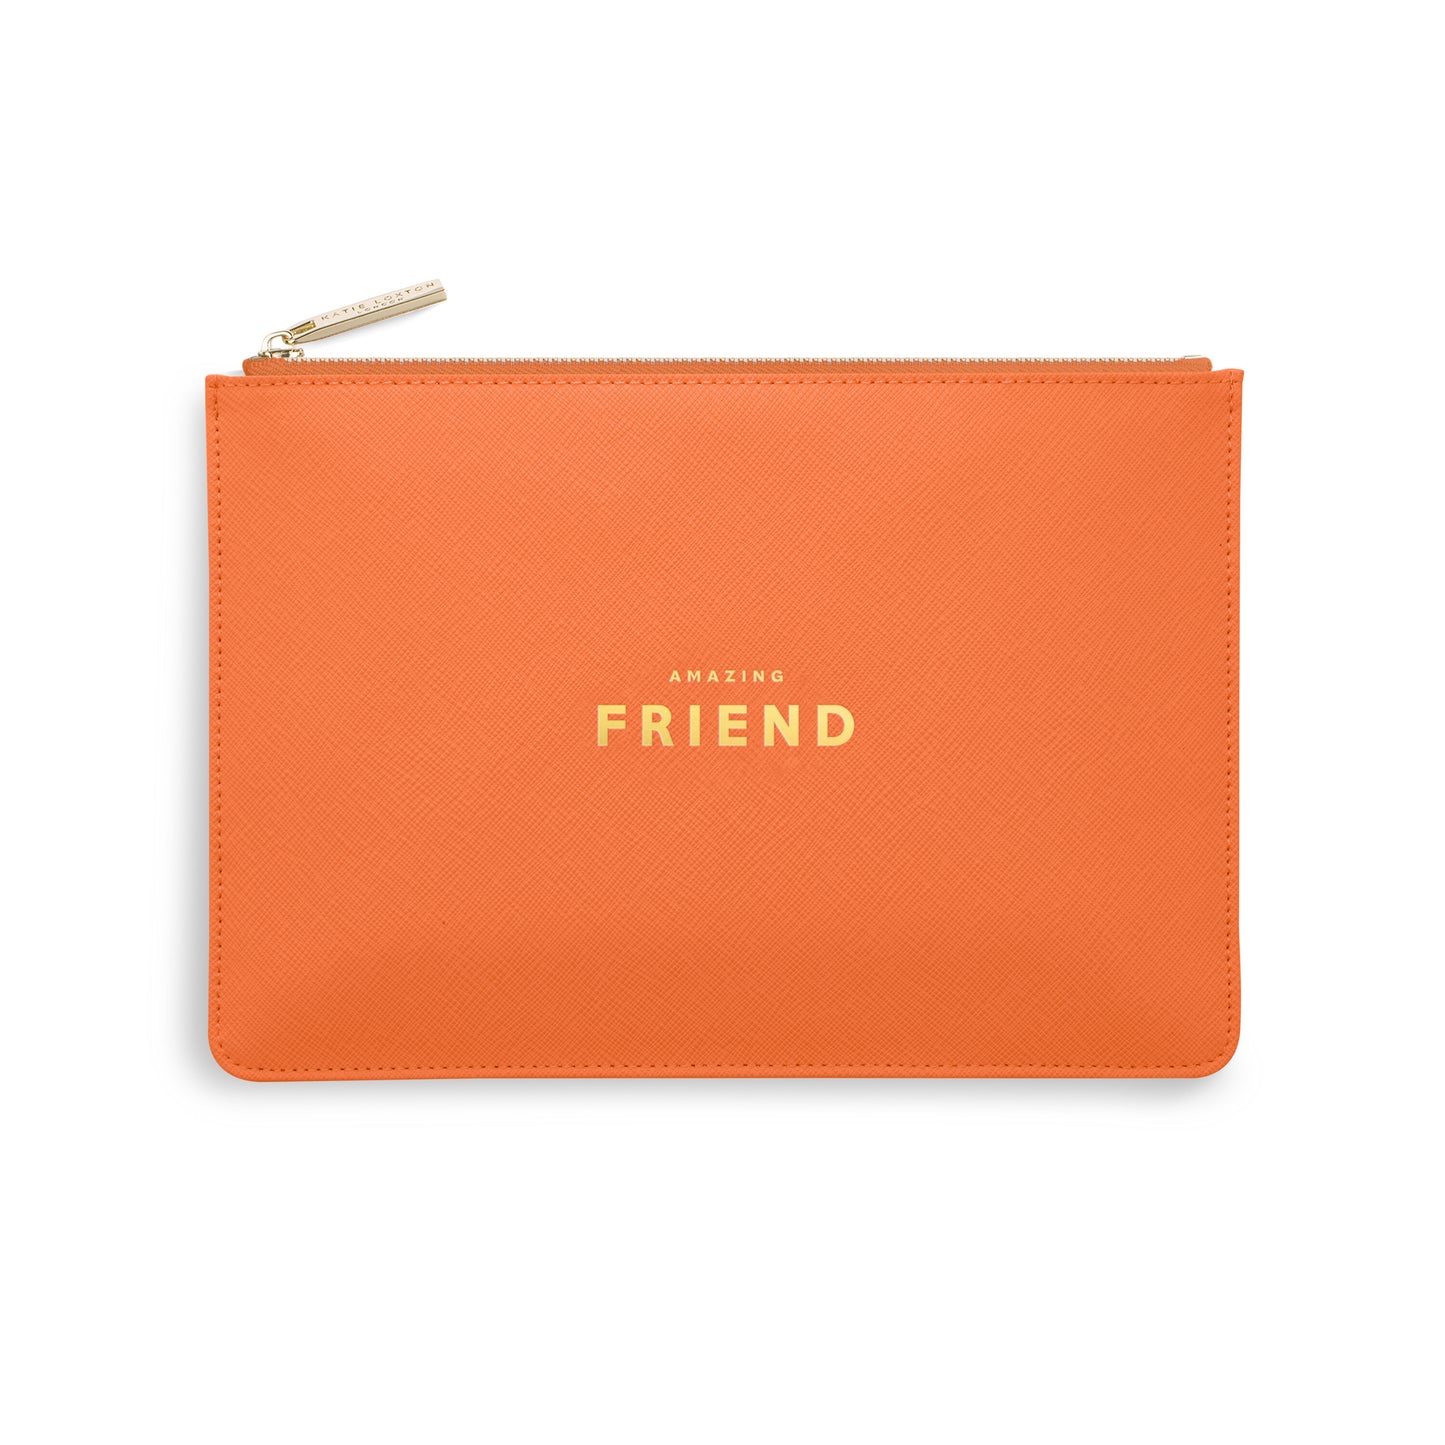 Perfect Pouch - Amazing Friend